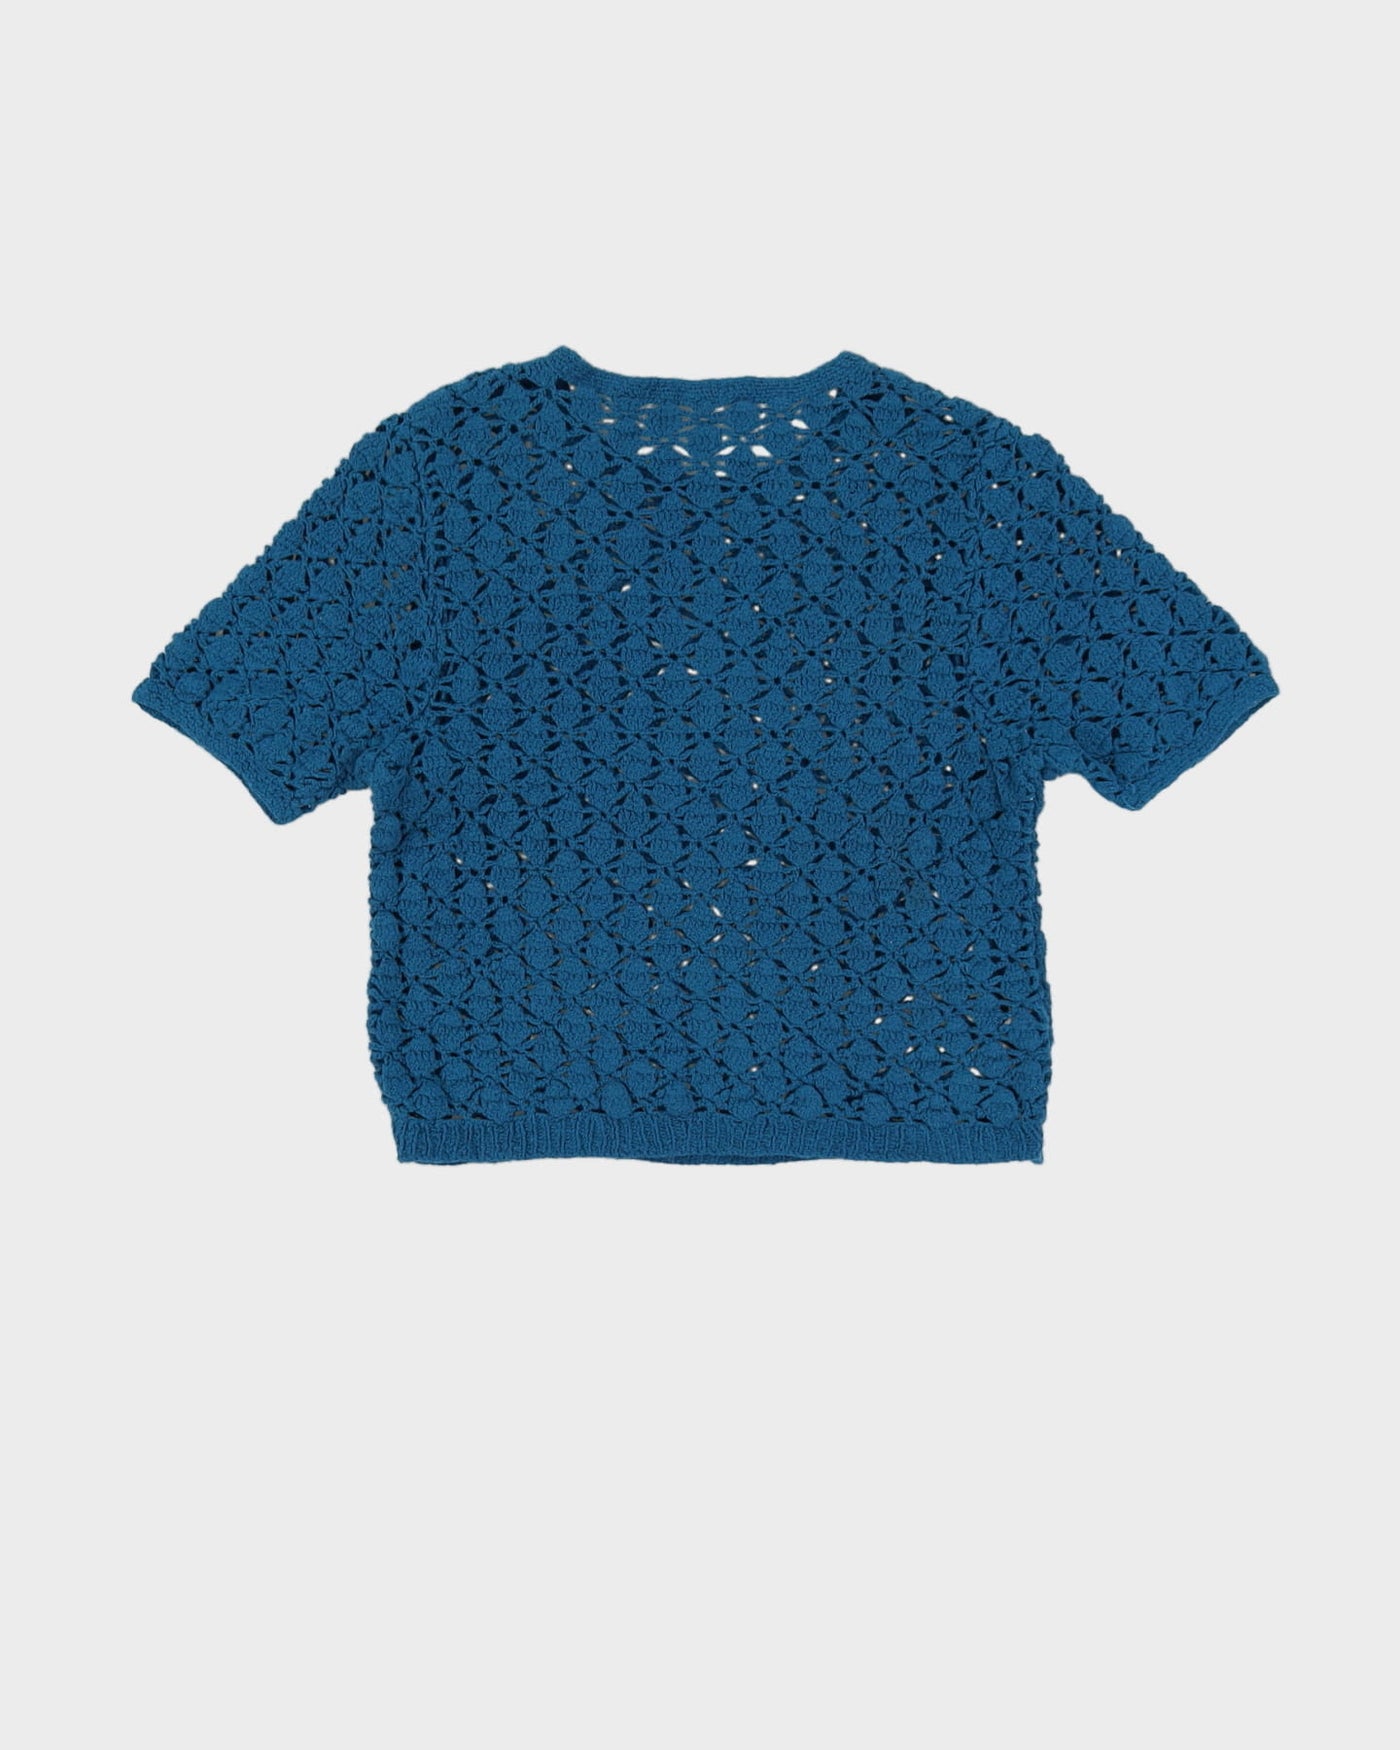 Vintage 1970s Blue Hand Crocheted Short Sleeve Top - XS